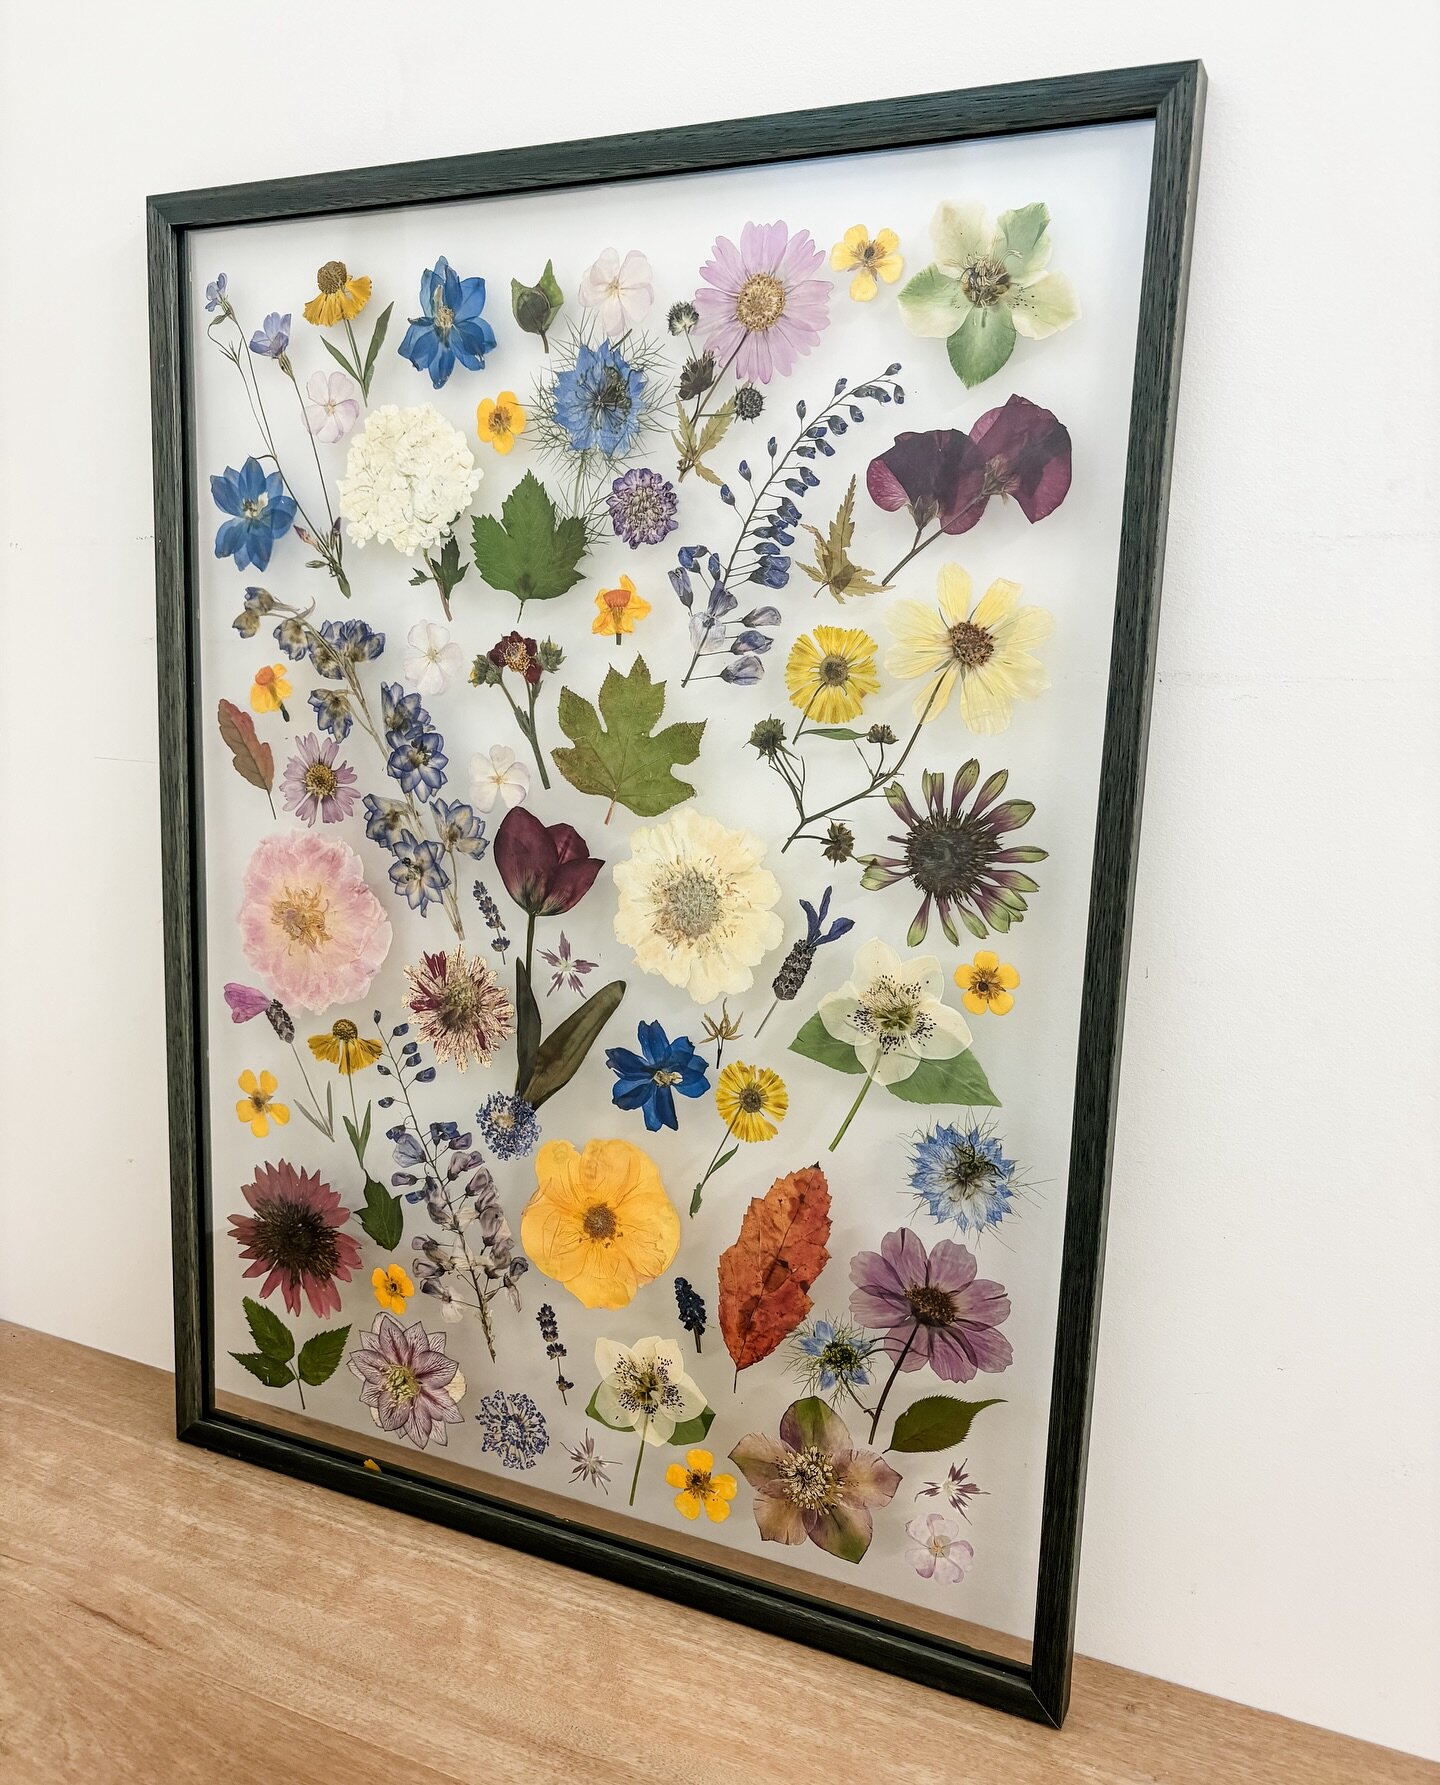 A special project a year in the making 💛 @thegardeningmumma 

Flowers collected and pressed from Annabel&rsquo;s beautiful garden over an entire year to create a special frame, now to enjoy all year round. 

&lsquo;A year of Basil Place&rsquo; frame